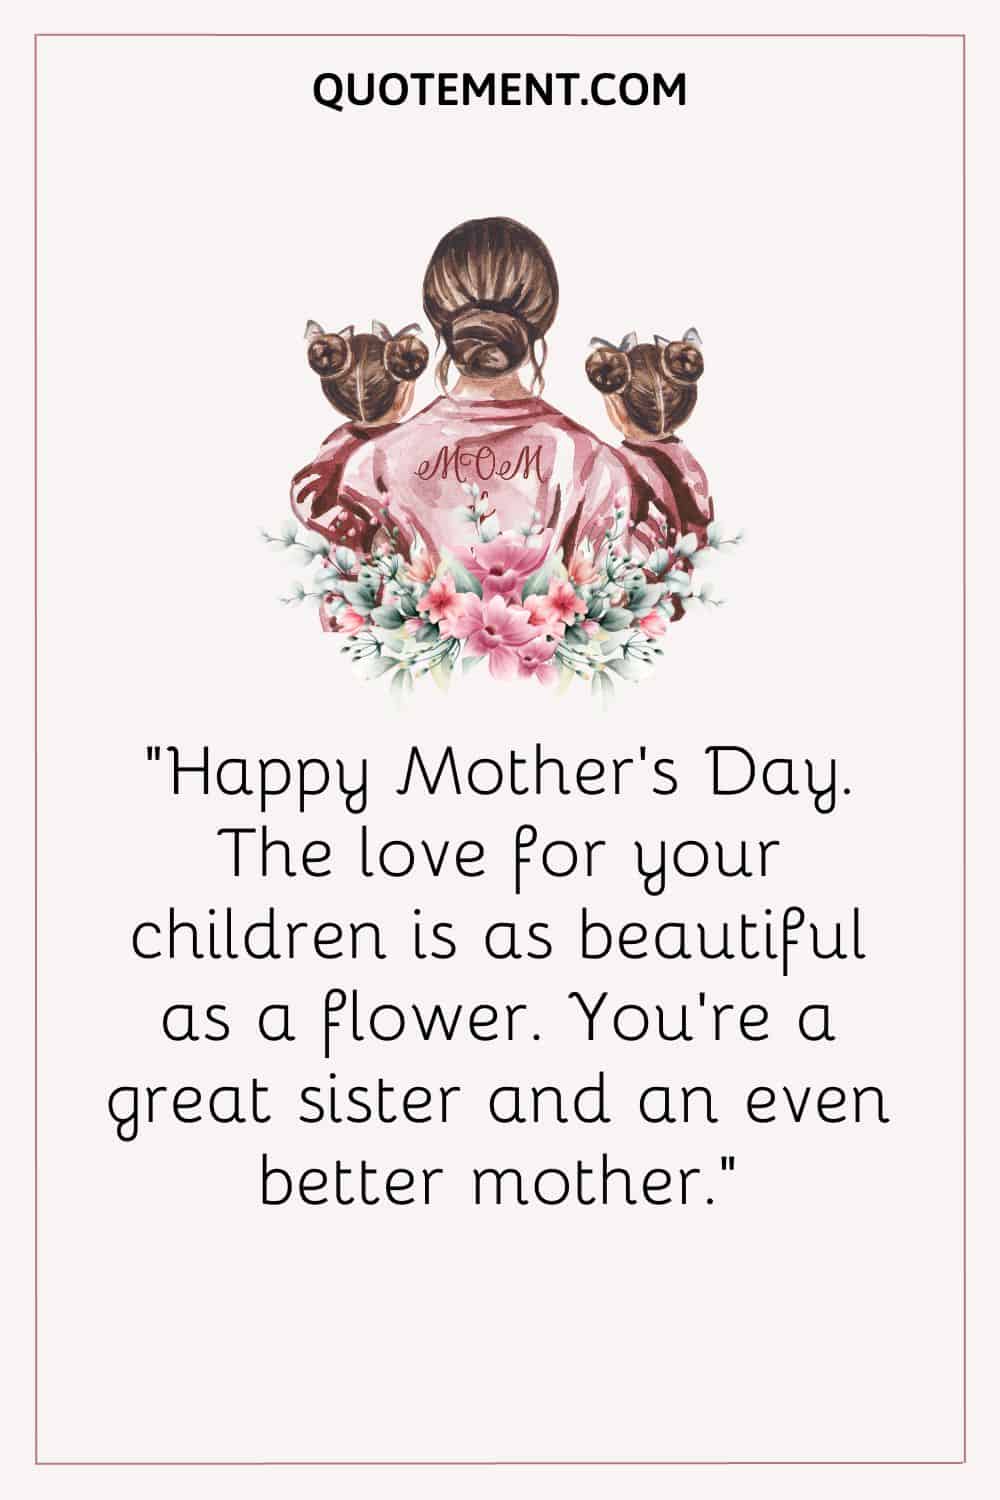 50 Beautiful And Touching Mother's Day Quotes For Sister